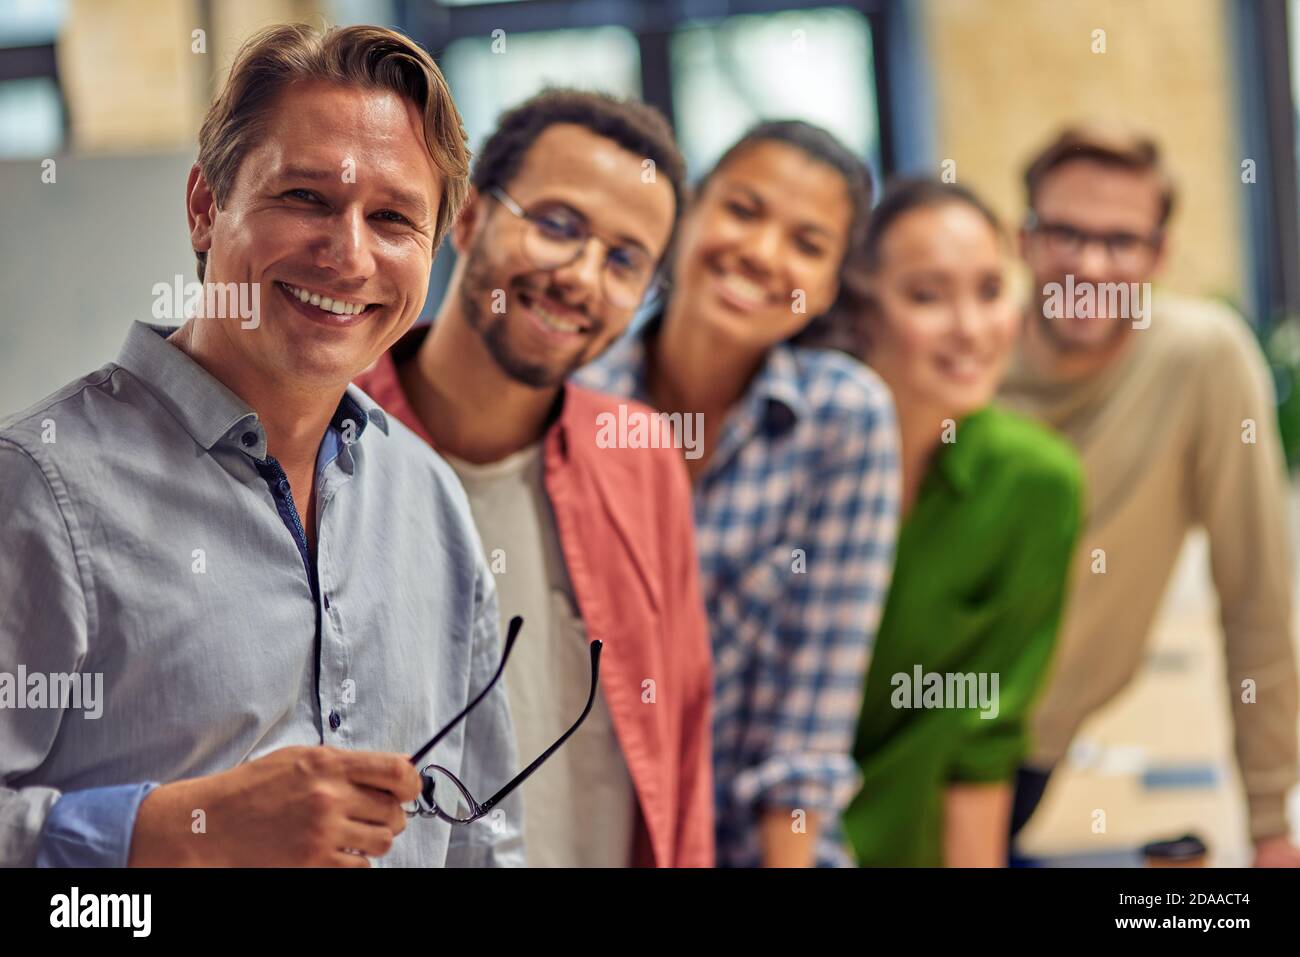 Powerful team. Group of young happy multiethnic colleagues smiling at camera while standing in the modern office, business people working together. Teamwork and cooperation concept Stock Photo